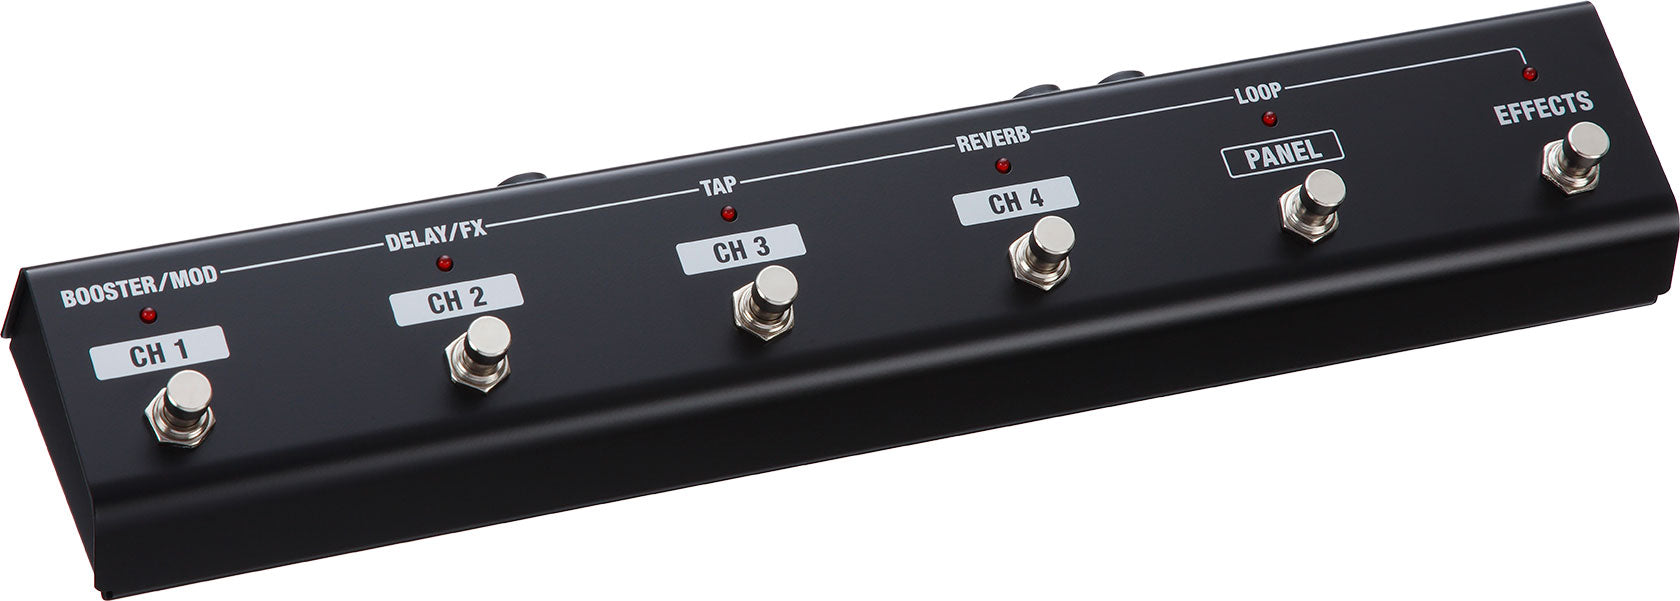 BOSS GAFC Amplifier Footswitch for Roland and Boss Amplifiers